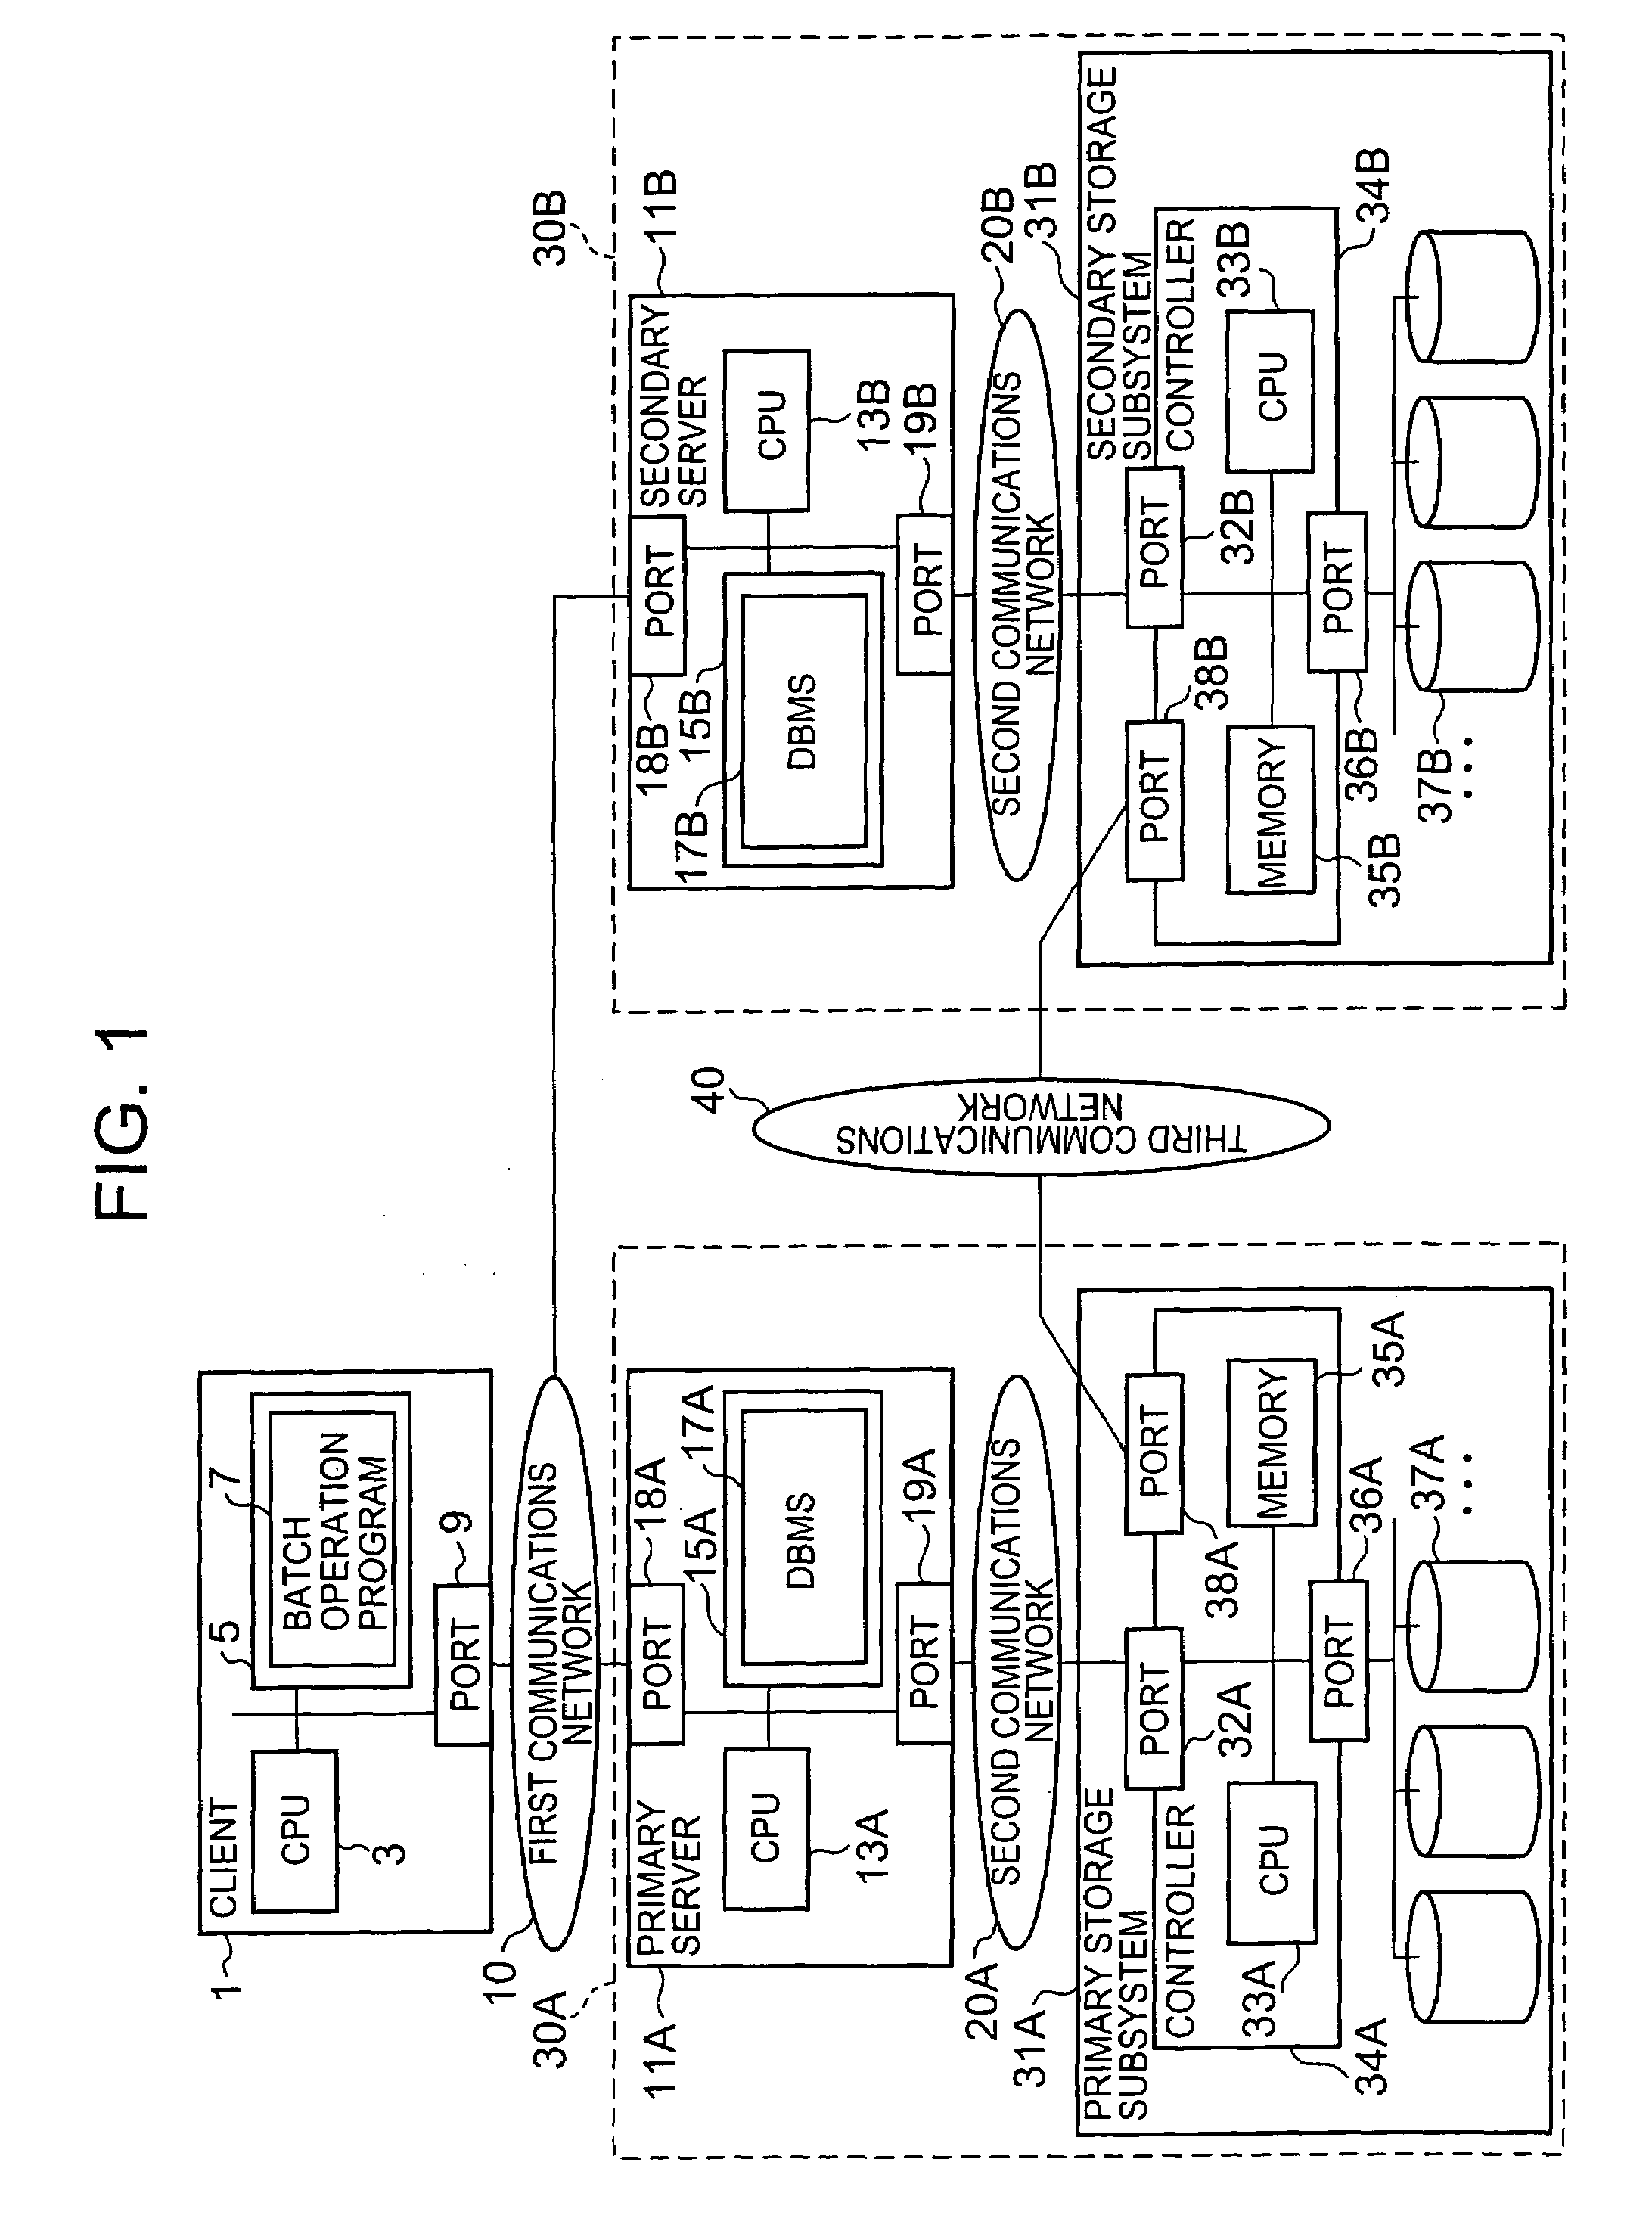 Storage control method for database recovery in logless mode